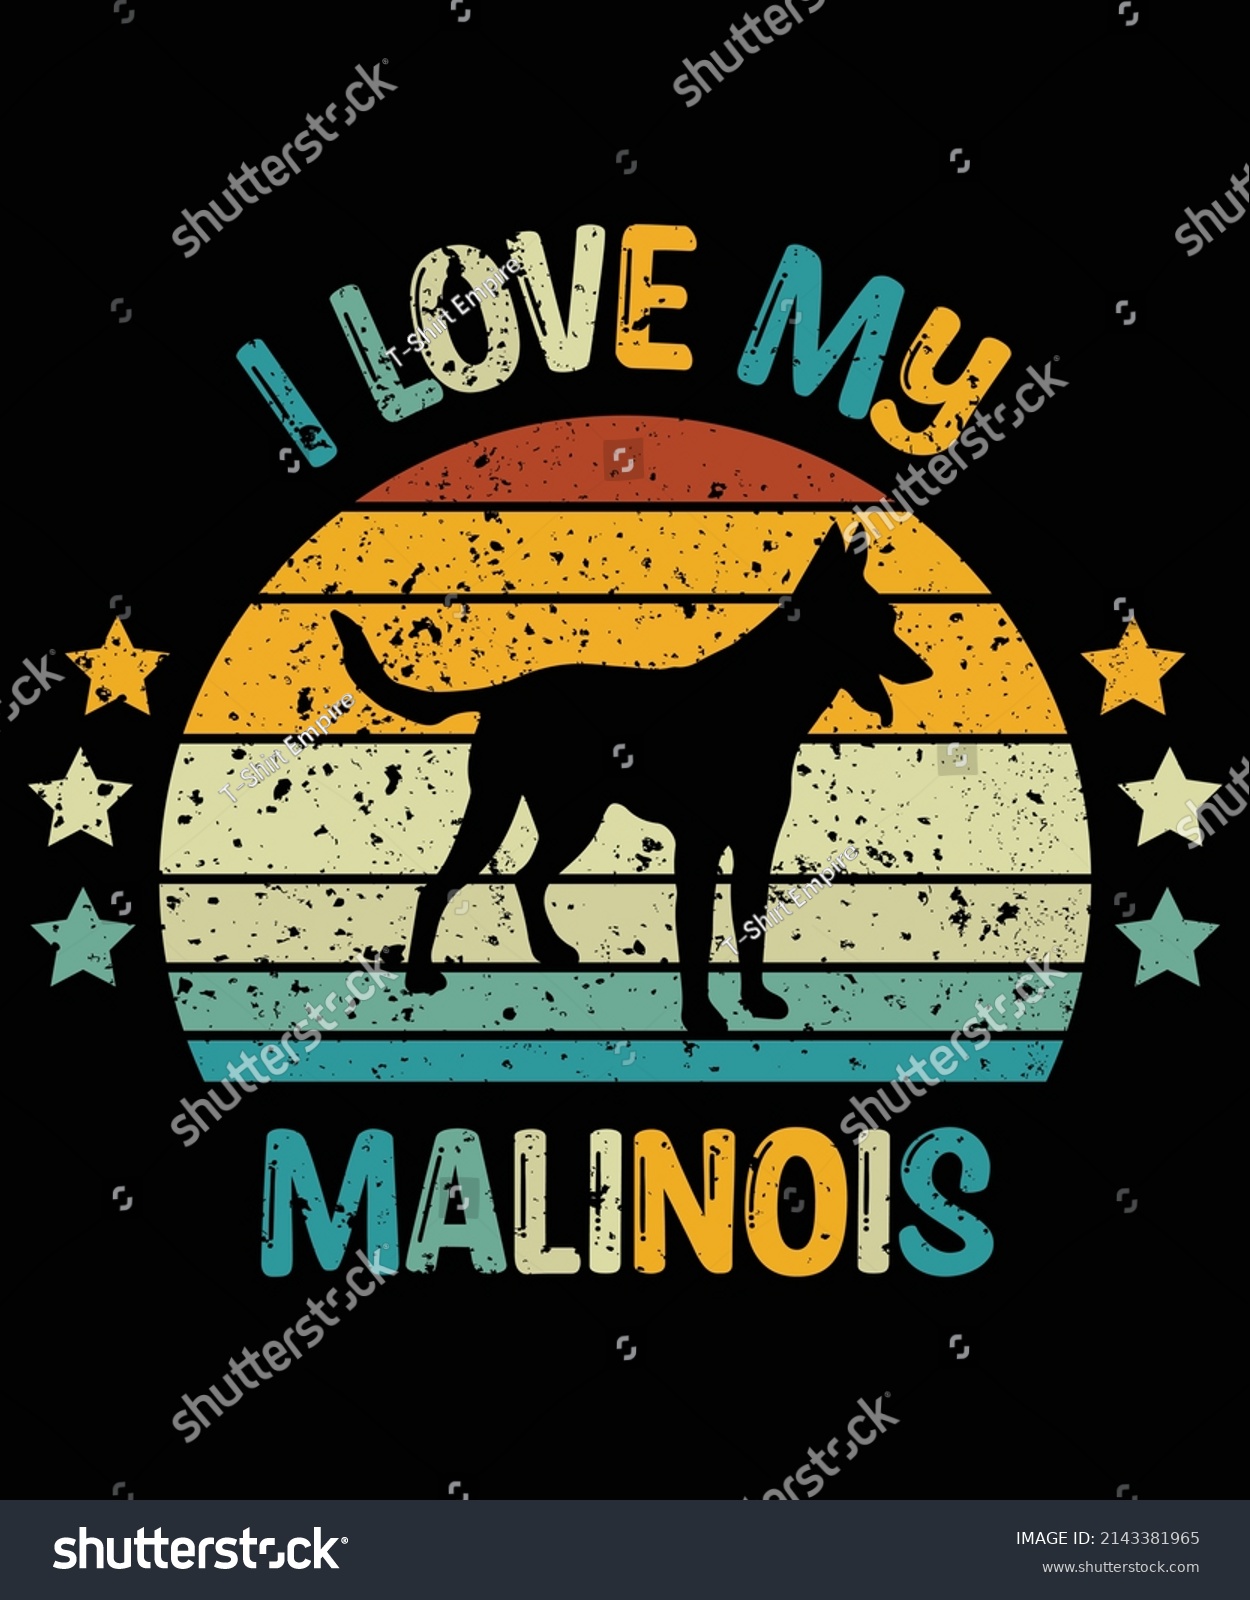 SVG of Malinois silhouette vintage and retro t-shirt design svg